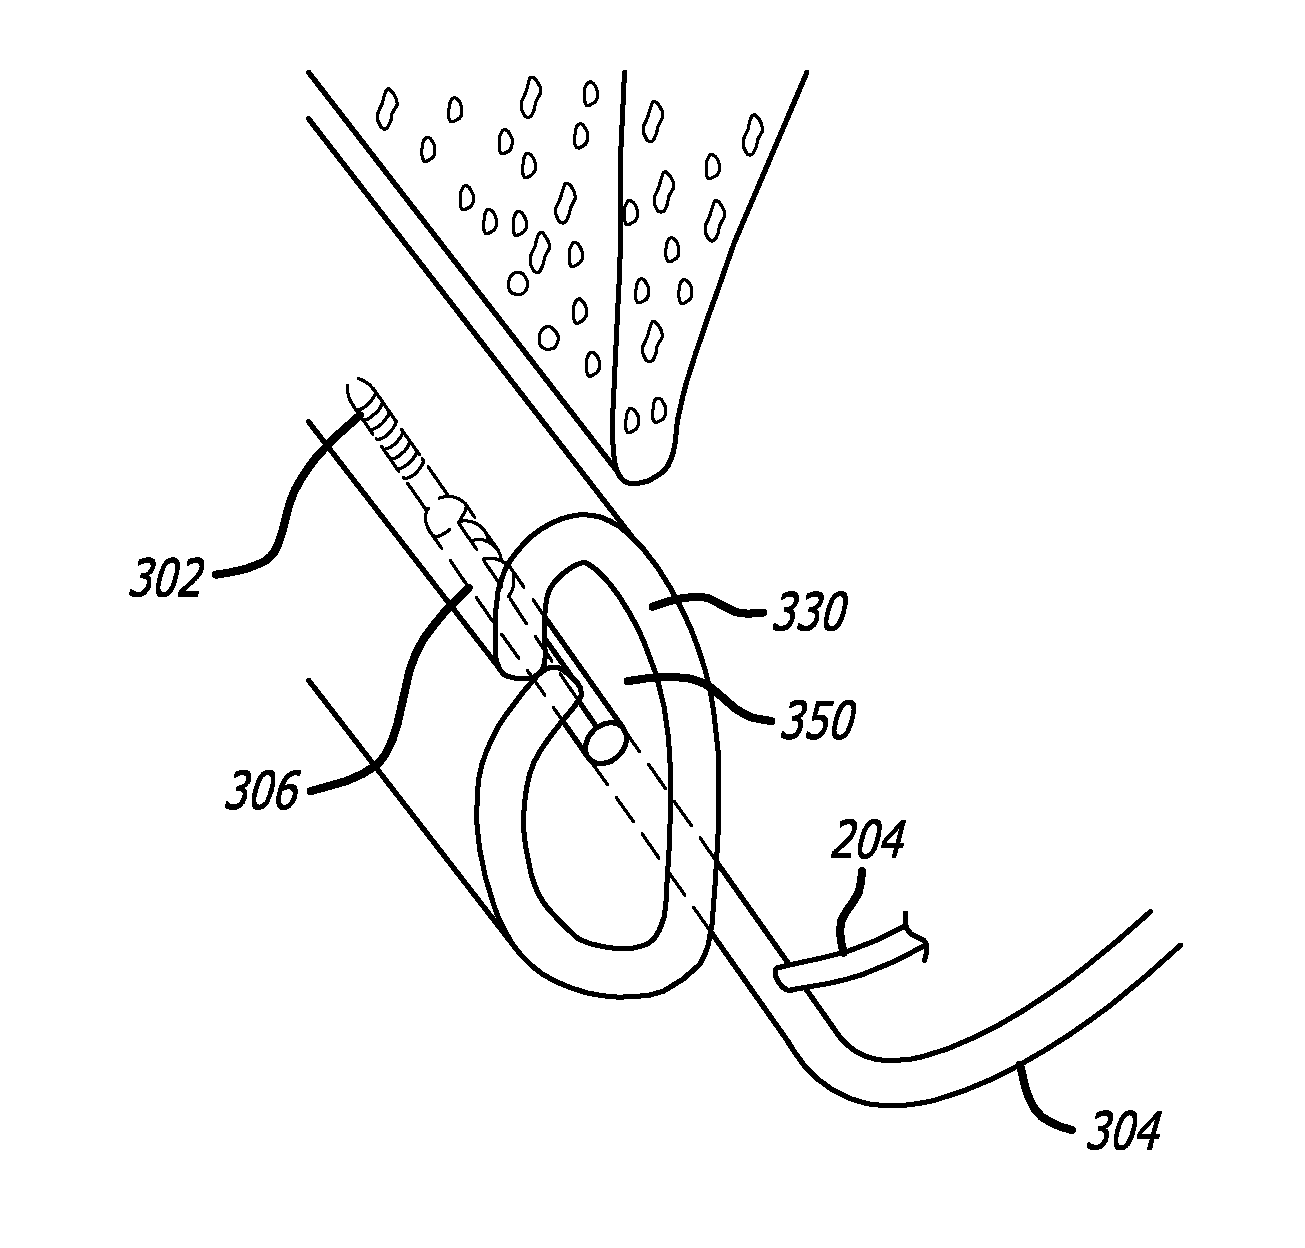 Method and System for Treating Target Tissue Within the Eustachian Tube